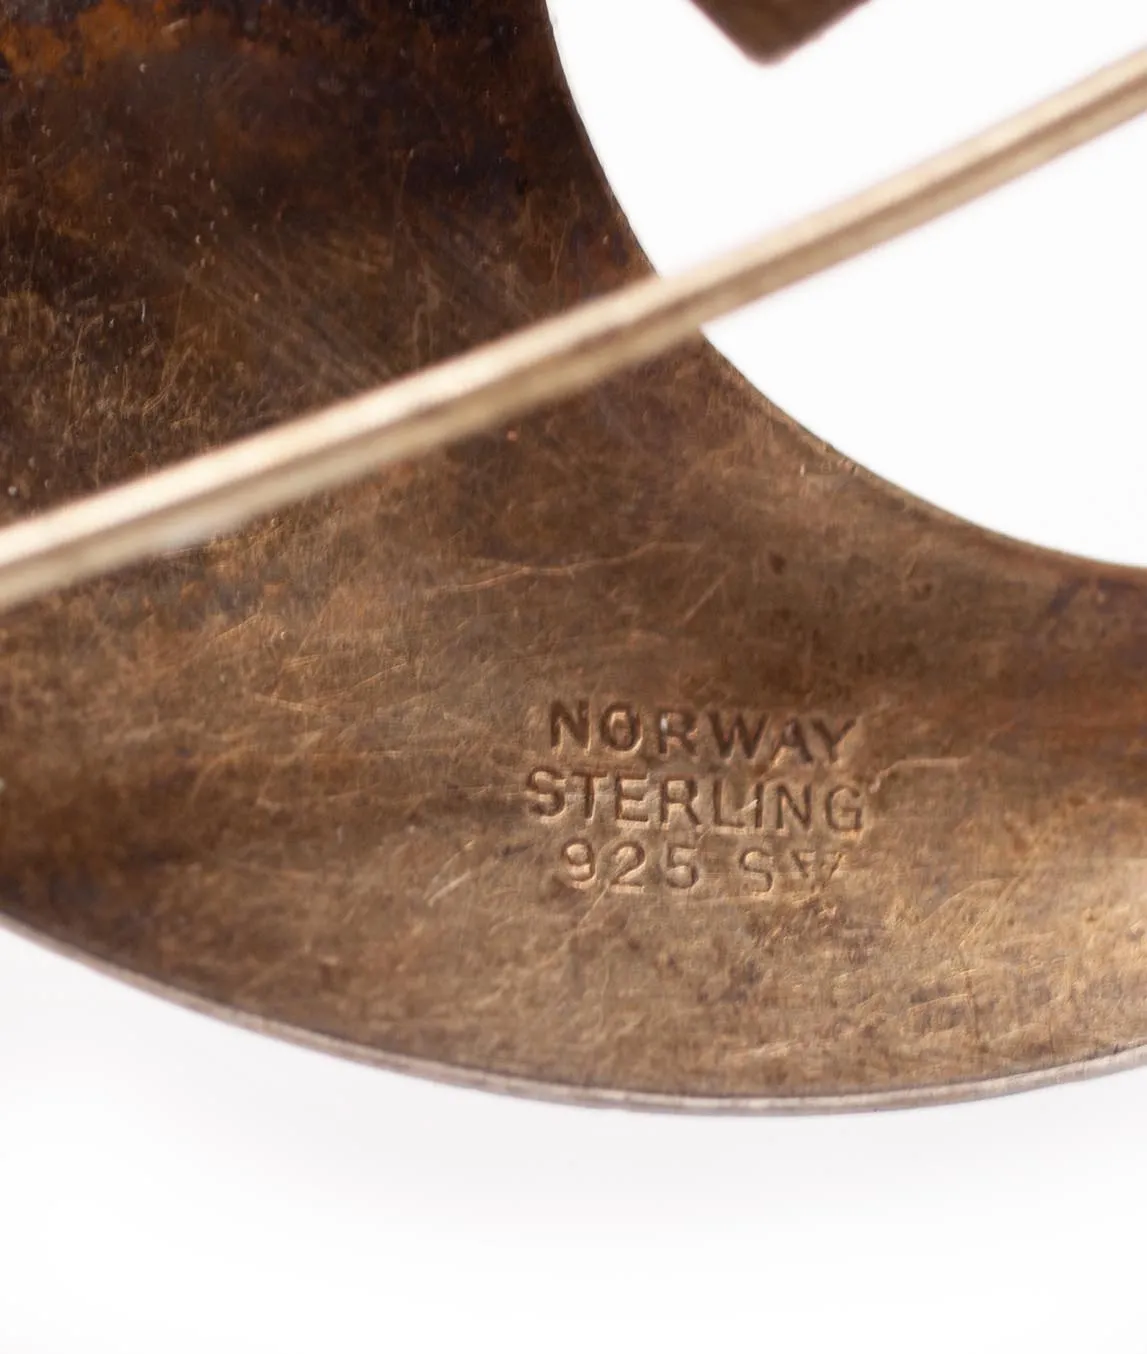 Close-up showing Finn Jensen stamp and Norway Sterling 925 marks